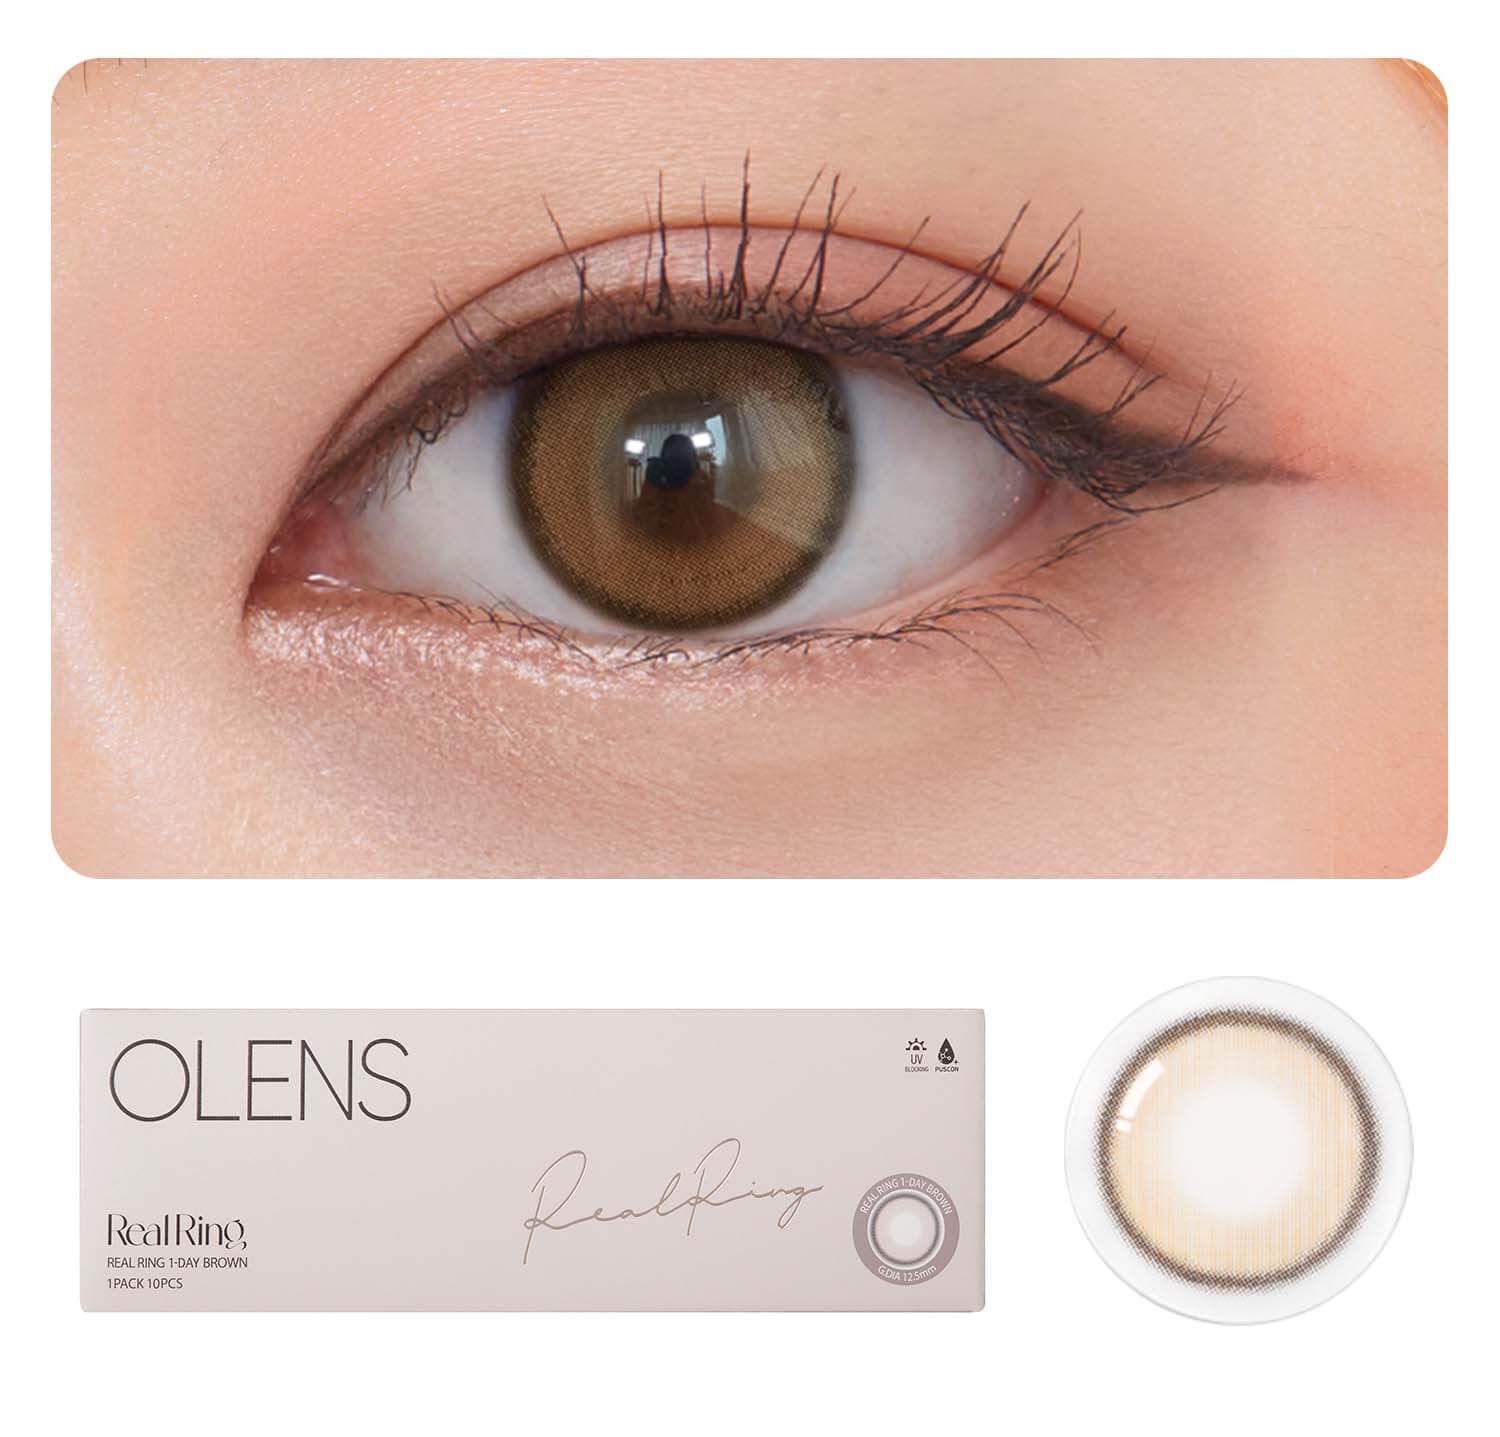 OLENS Premium Color Contact Lens | Real Ring Brown contact lens | Soft Ring is created on the outer of the lens | 1 day disposable trial pack | o-lens.co.in